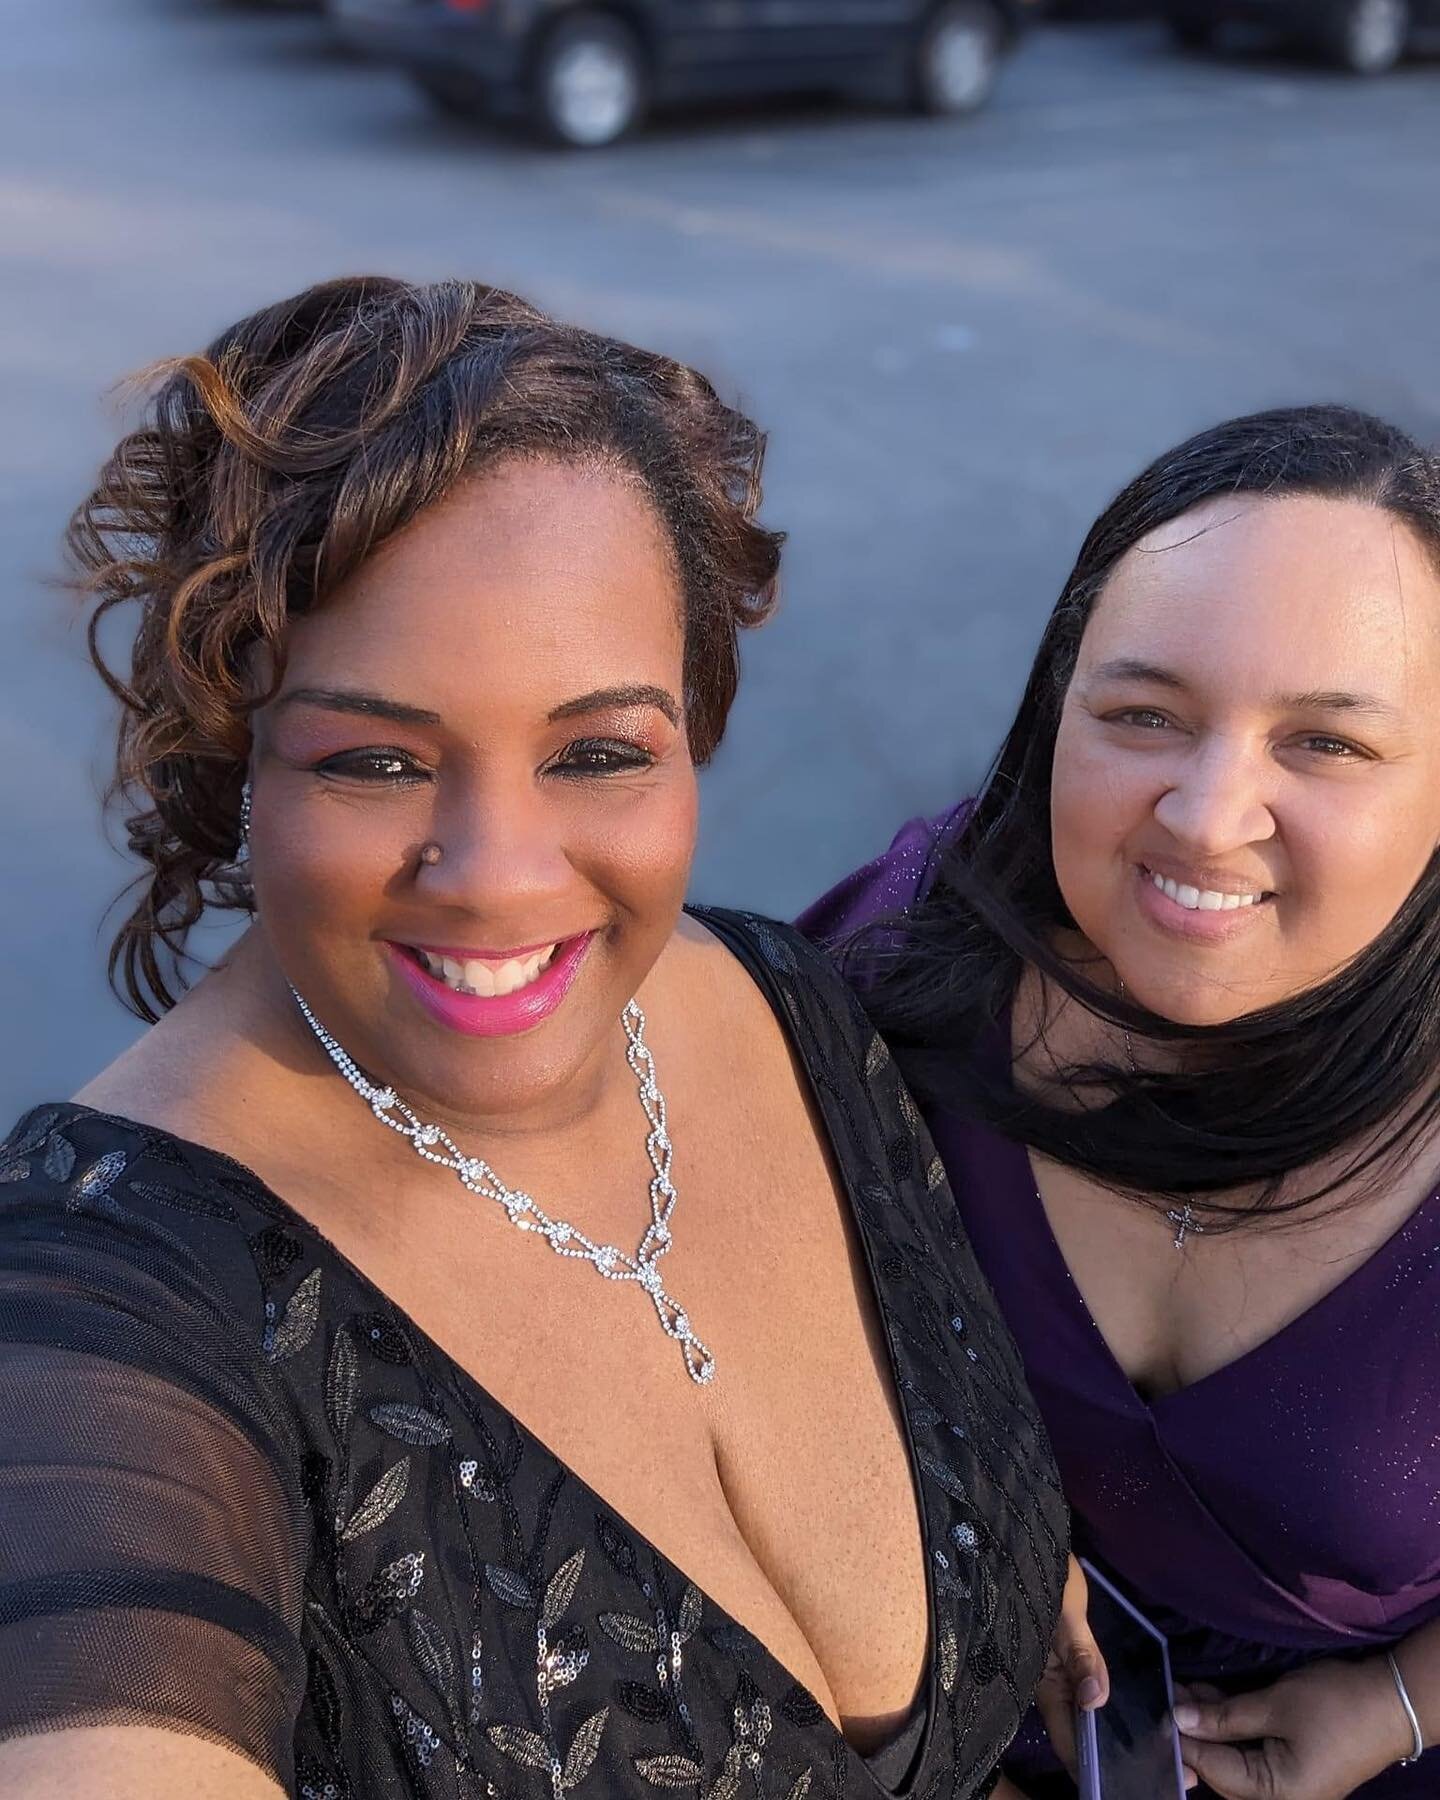 Stepping out in style!👠🍾🥂

Last night was the Triangle NACE Awards Gala in Raleigh, North Carolina @raleighmarriottcrabtree 

 @abcassoc president Veronica Foster, MWP and Membership Liaison Michole Council PWP were in attendance to represent ABC 